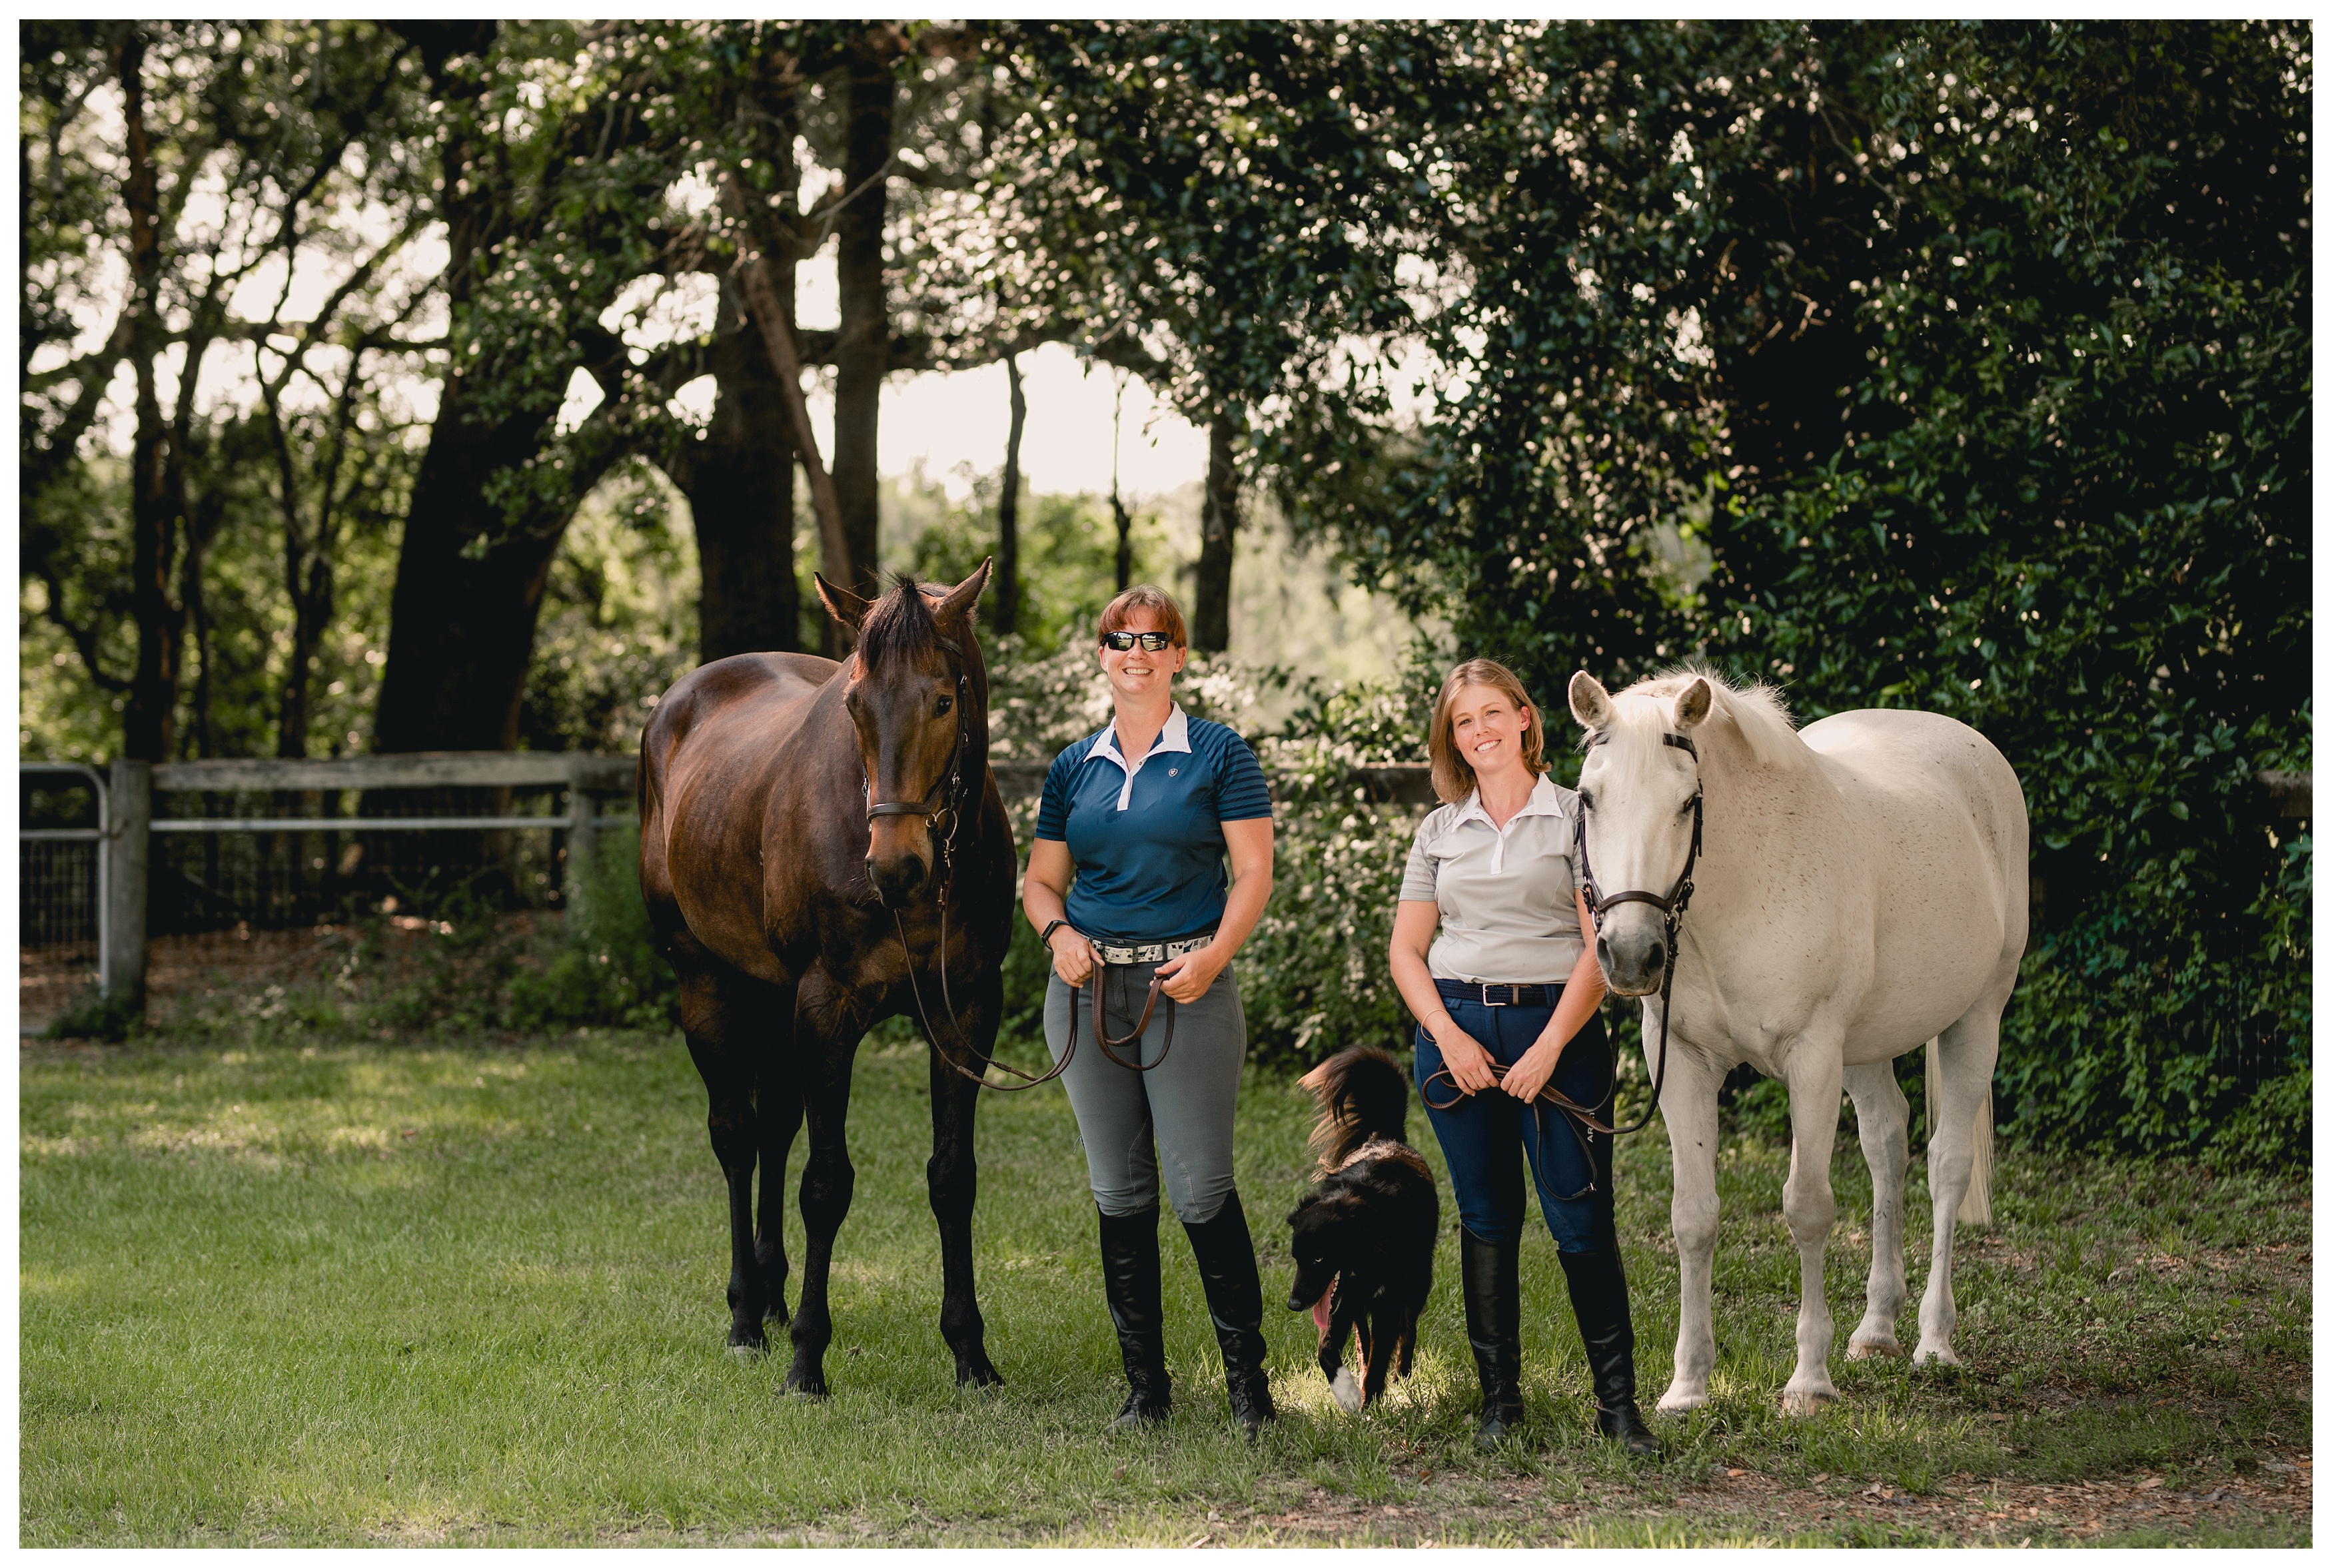 Game on Eventing farm in Newberry, Florida. Shelly Williams Photography